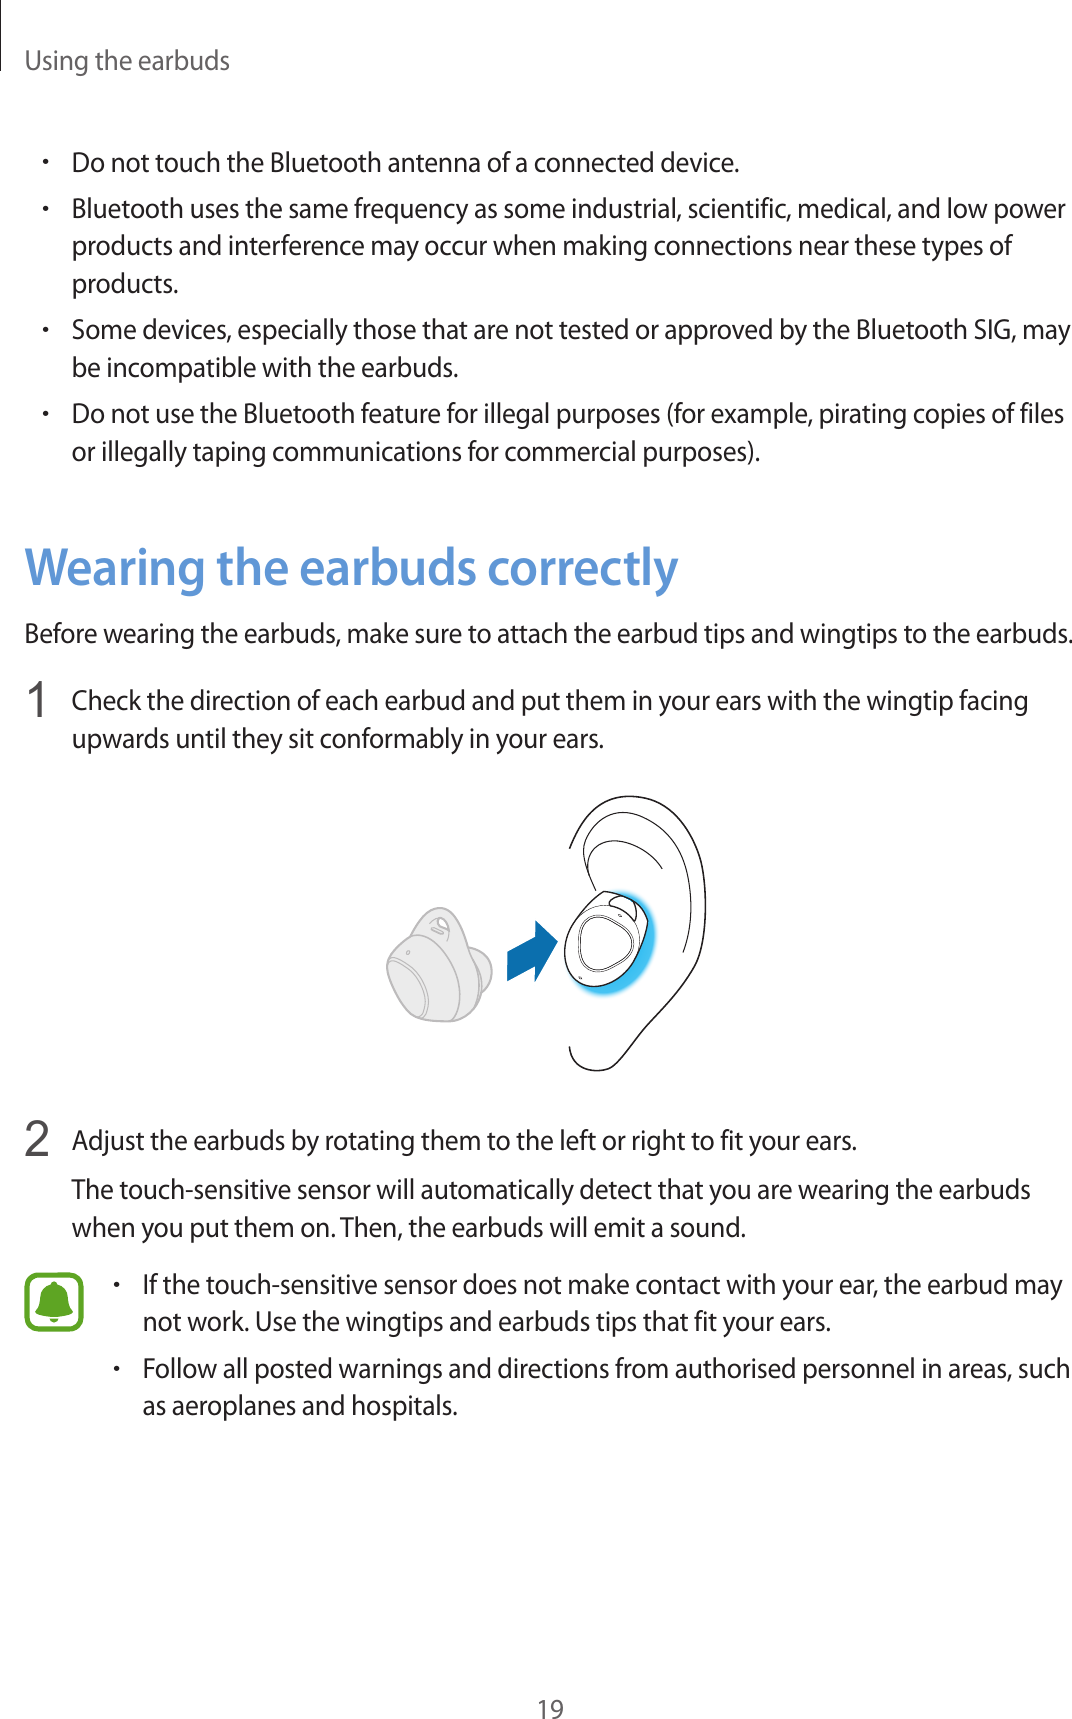 Using the earbuds19•Do not touch the Bluetooth antenna of a connected device.•Bluetooth uses the same frequency as some industrial, scientific, medical, and low power products and interference may occur when making connections near these types of products.•Some devices, especially those that are not tested or approved by the Bluetooth SIG, may be incompatible with the earbuds.•Do not use the Bluetooth feature for illegal purposes (for example, pirating copies of files or illegally taping communications for commercial purposes).Wearing the earbuds correctlyBefore wearing the earbuds, make sure to attach the earbud tips and wingtips to the earbuds.1  Check the direction of each earbud and put them in your ears with the wingtip facing upwards until they sit conformably in your ears.2  Adjust the earbuds by rotating them to the left or right to fit your ears.The touch-sensitive sensor will automatically detect that you are wearing the earbuds when you put them on. Then, the earbuds will emit a sound.•If the touch-sensitive sensor does not make contact with your ear, the earbud may not work. Use the wingtips and earbuds tips that fit your ears.•Follow all posted warnings and directions from authorised personnel in areas, such as aeroplanes and hospitals.